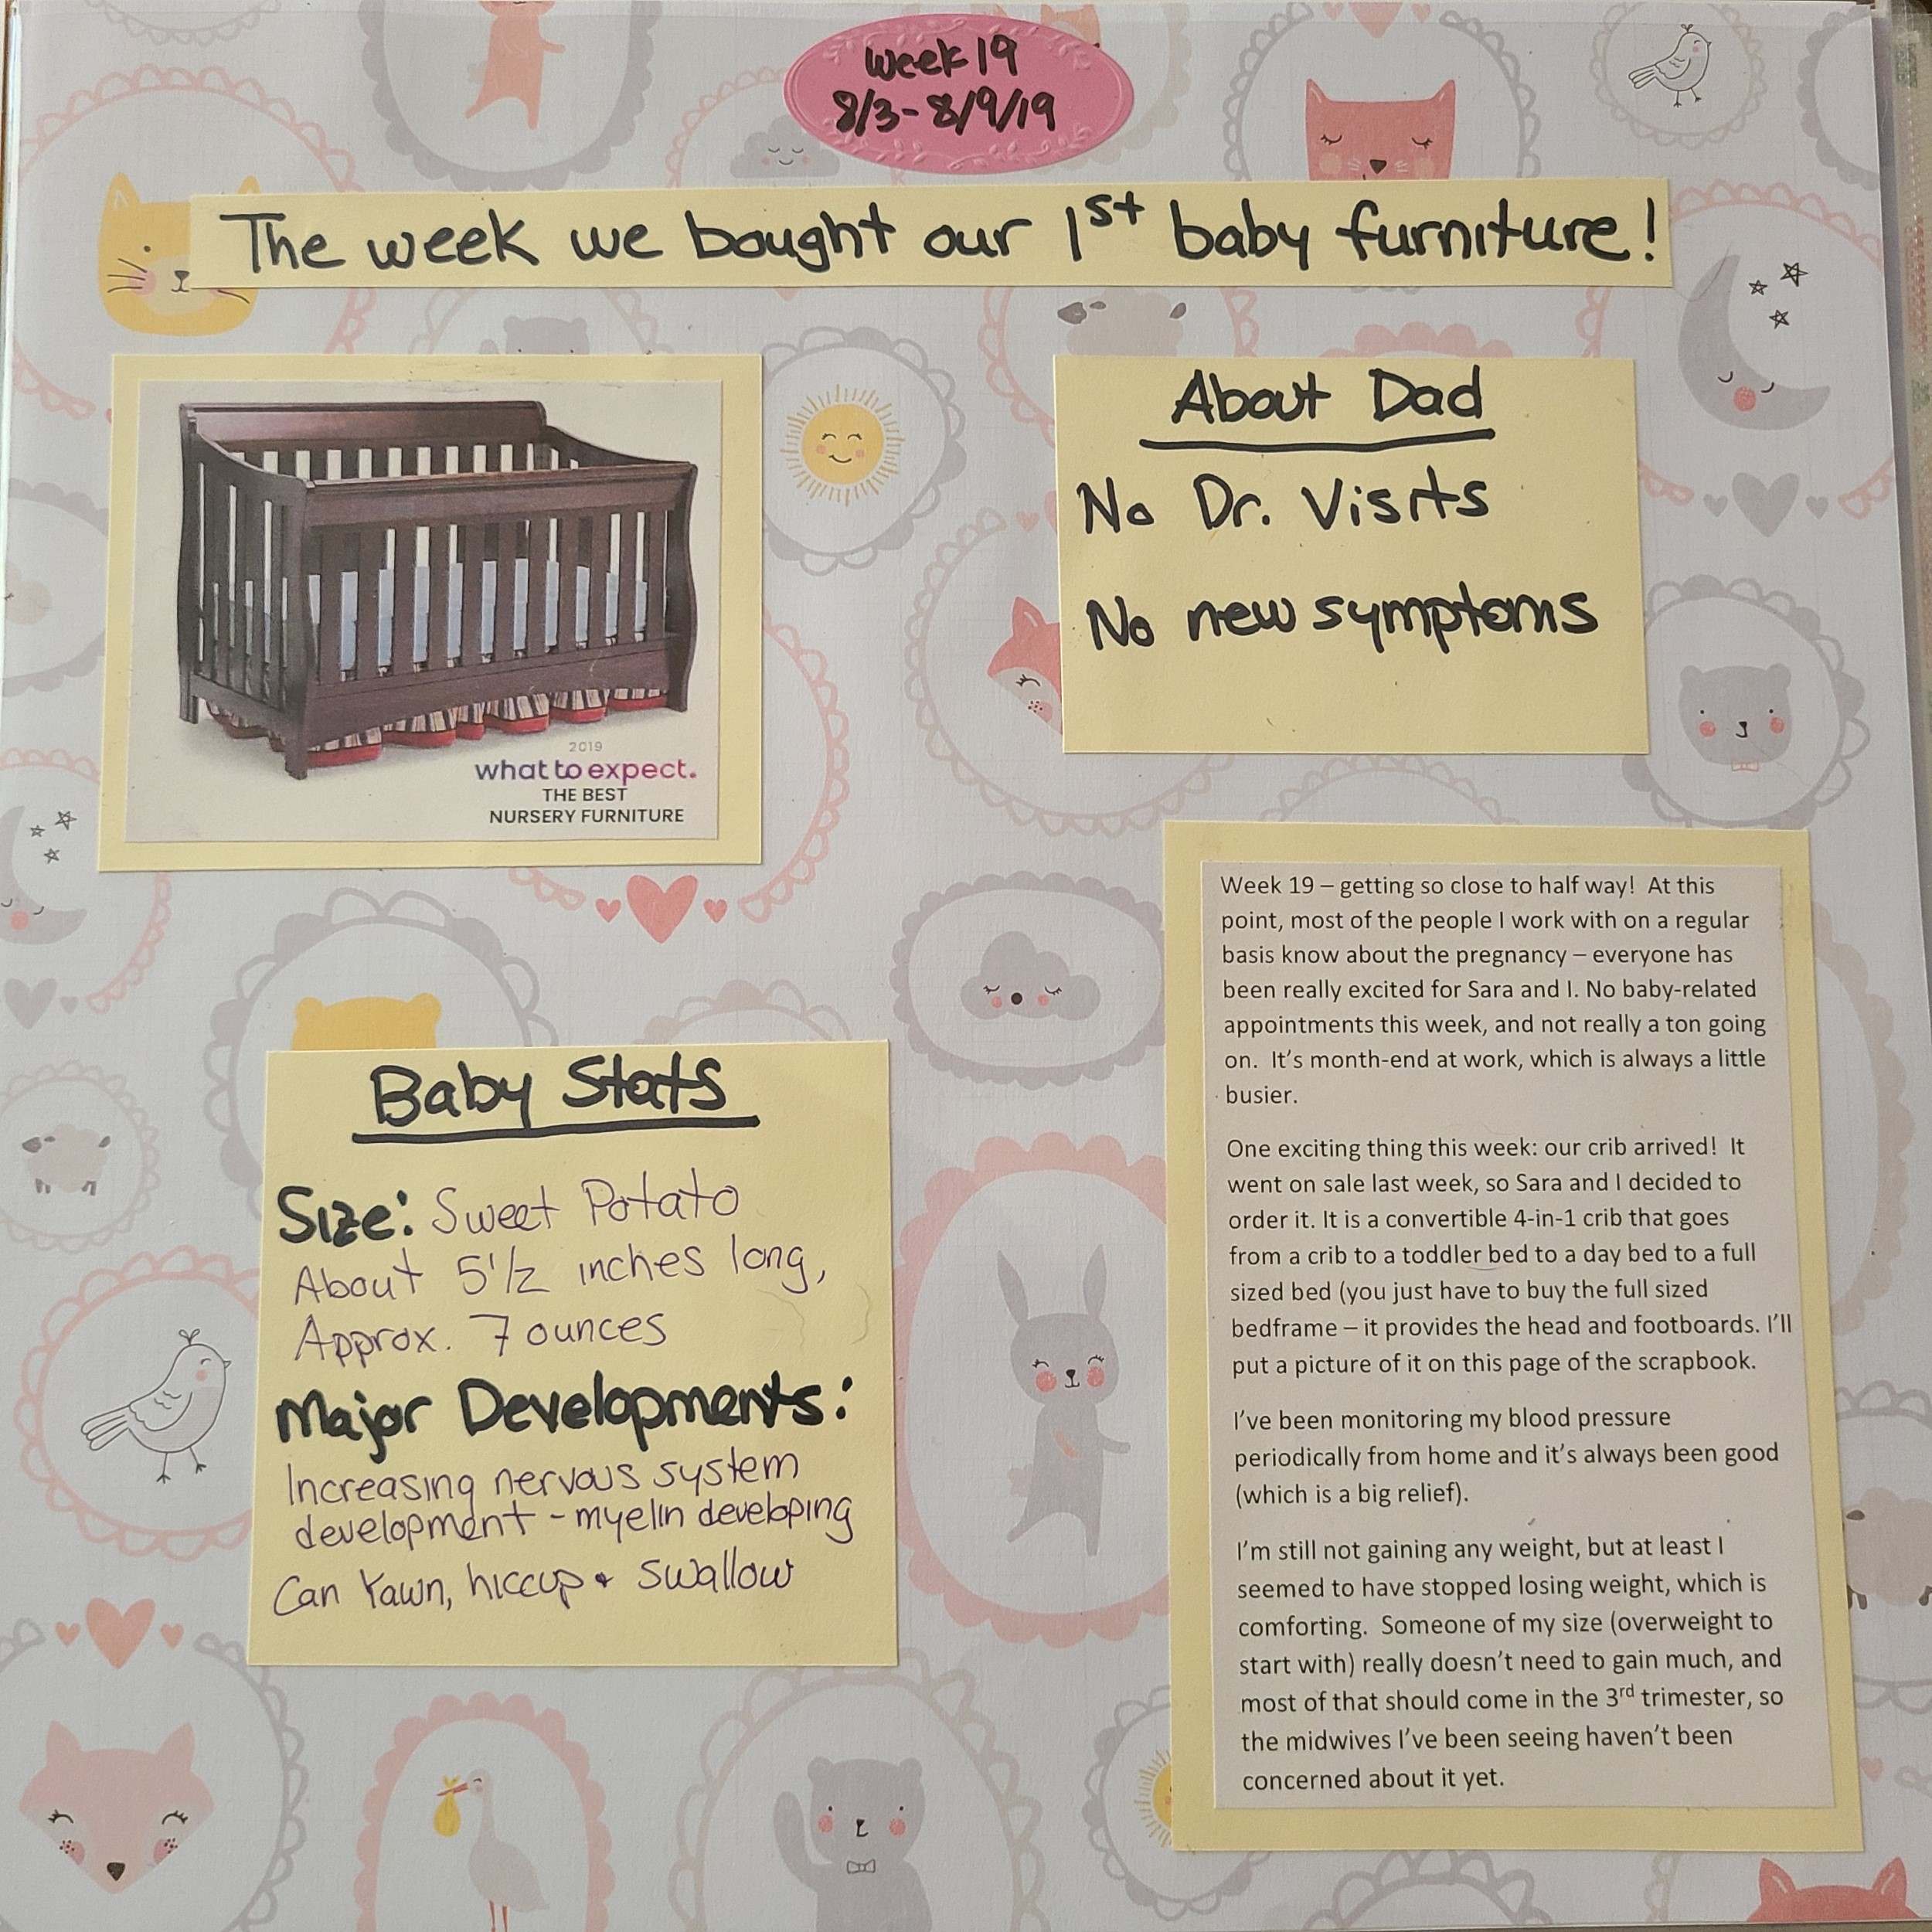 Week 19 scrapbook page - background includes various light pastel colored drawings of cute animals, clouds, the moon and sun.  There is a picture of a dark brown crib with a light blue mattress.